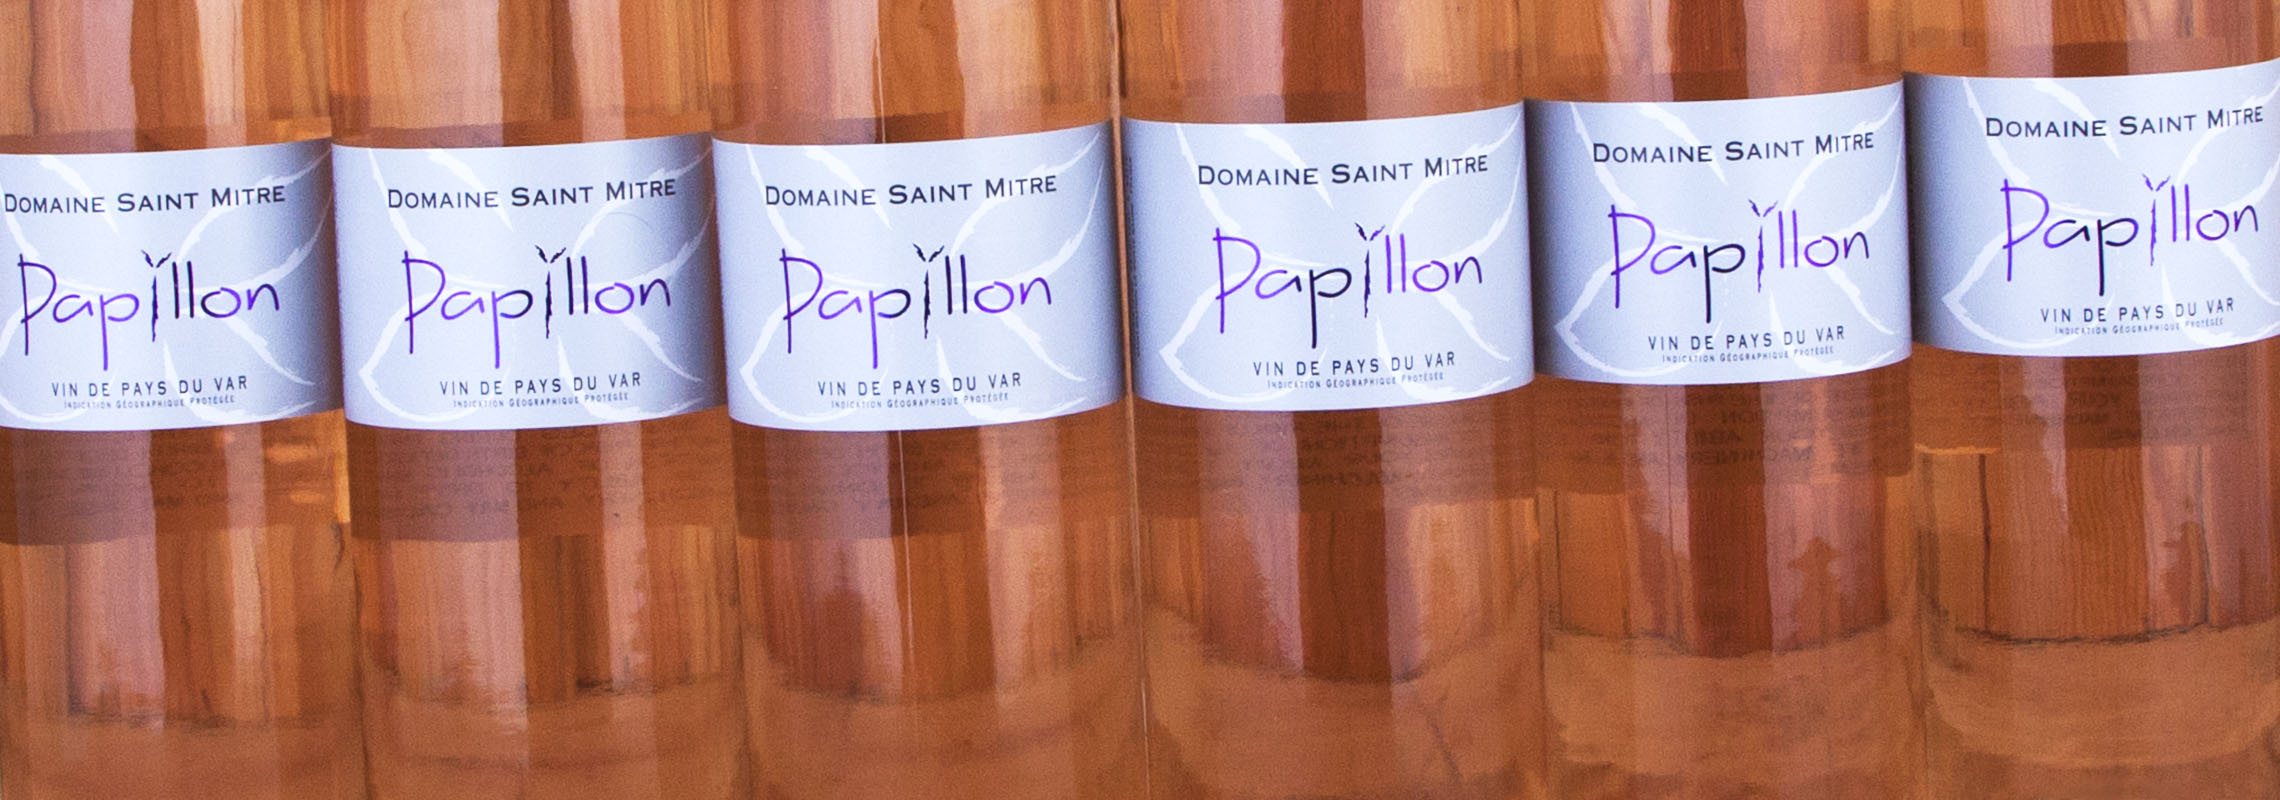 image - Papillon Rosé is one of the very popular rosé wines for sale on WineBid